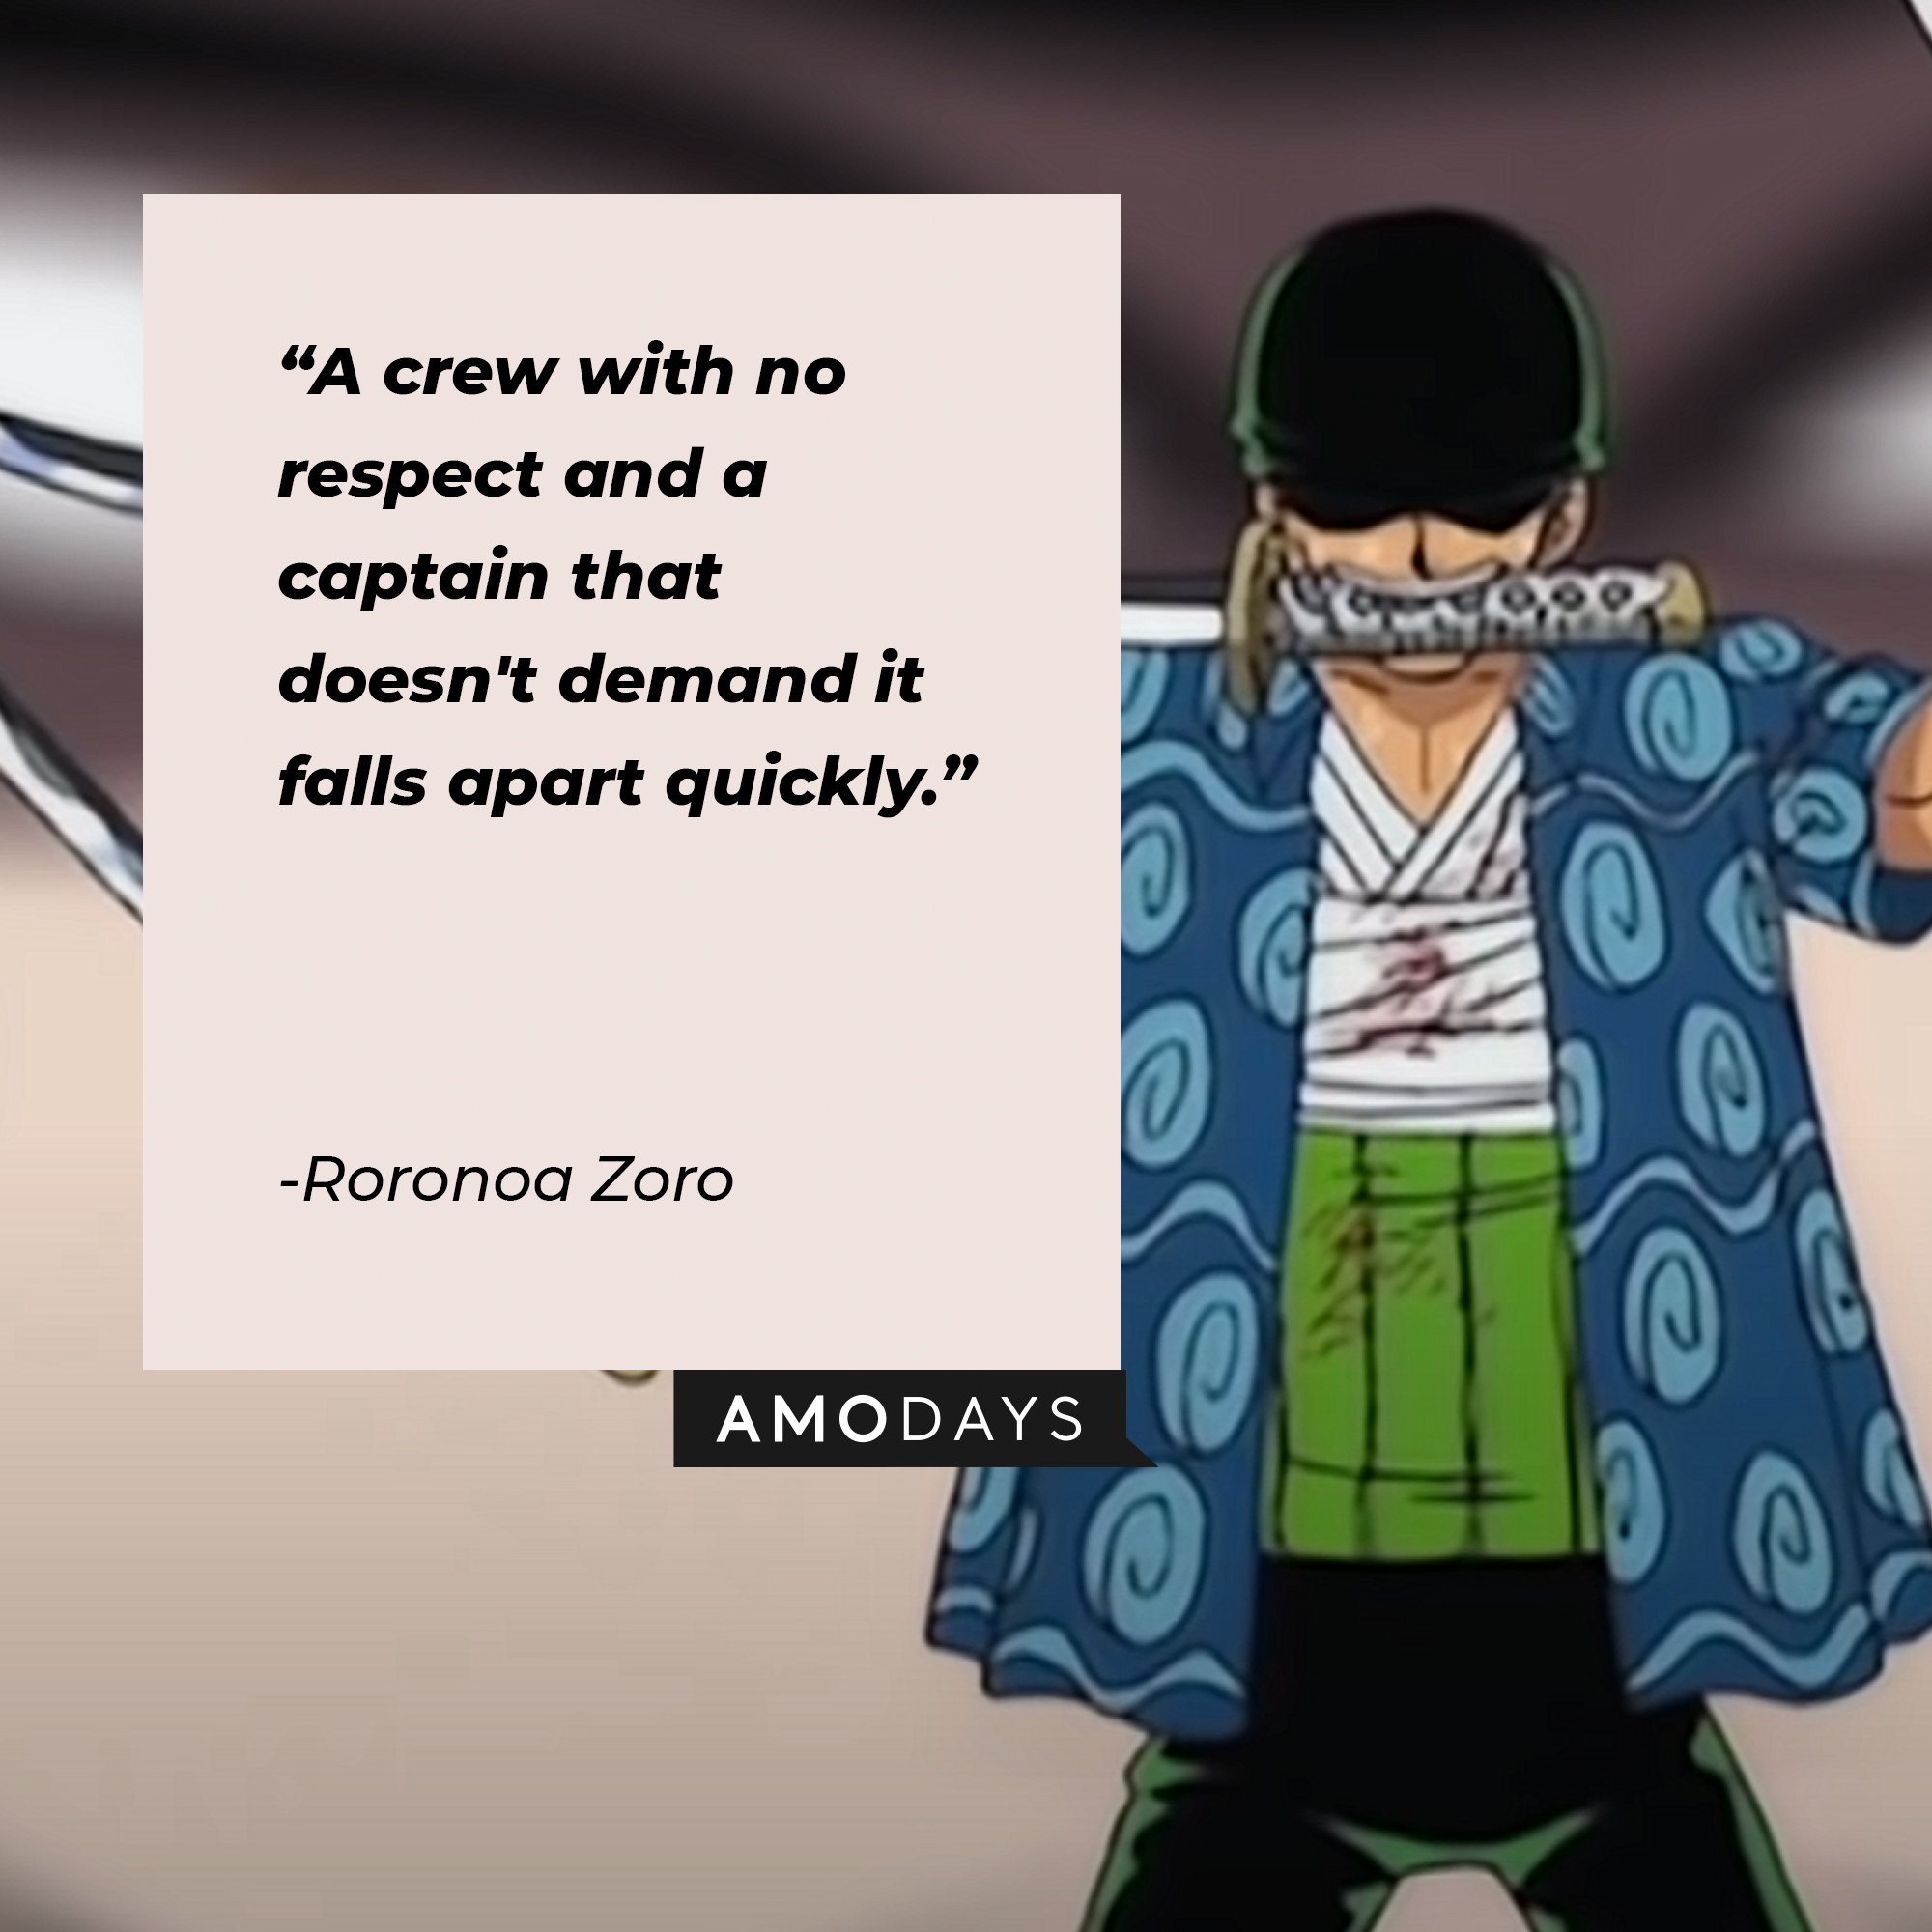 Roronoa Zoro’s quote: "I'm going to be the world's greatest swordsman! All I have left is my destiny! My name may be infamous… but it's gonna shake the world!" |  Image: AmoDays "A crew with no respect and a captain that doesn't demand it falls apart quickly." |  Image: AmoDays